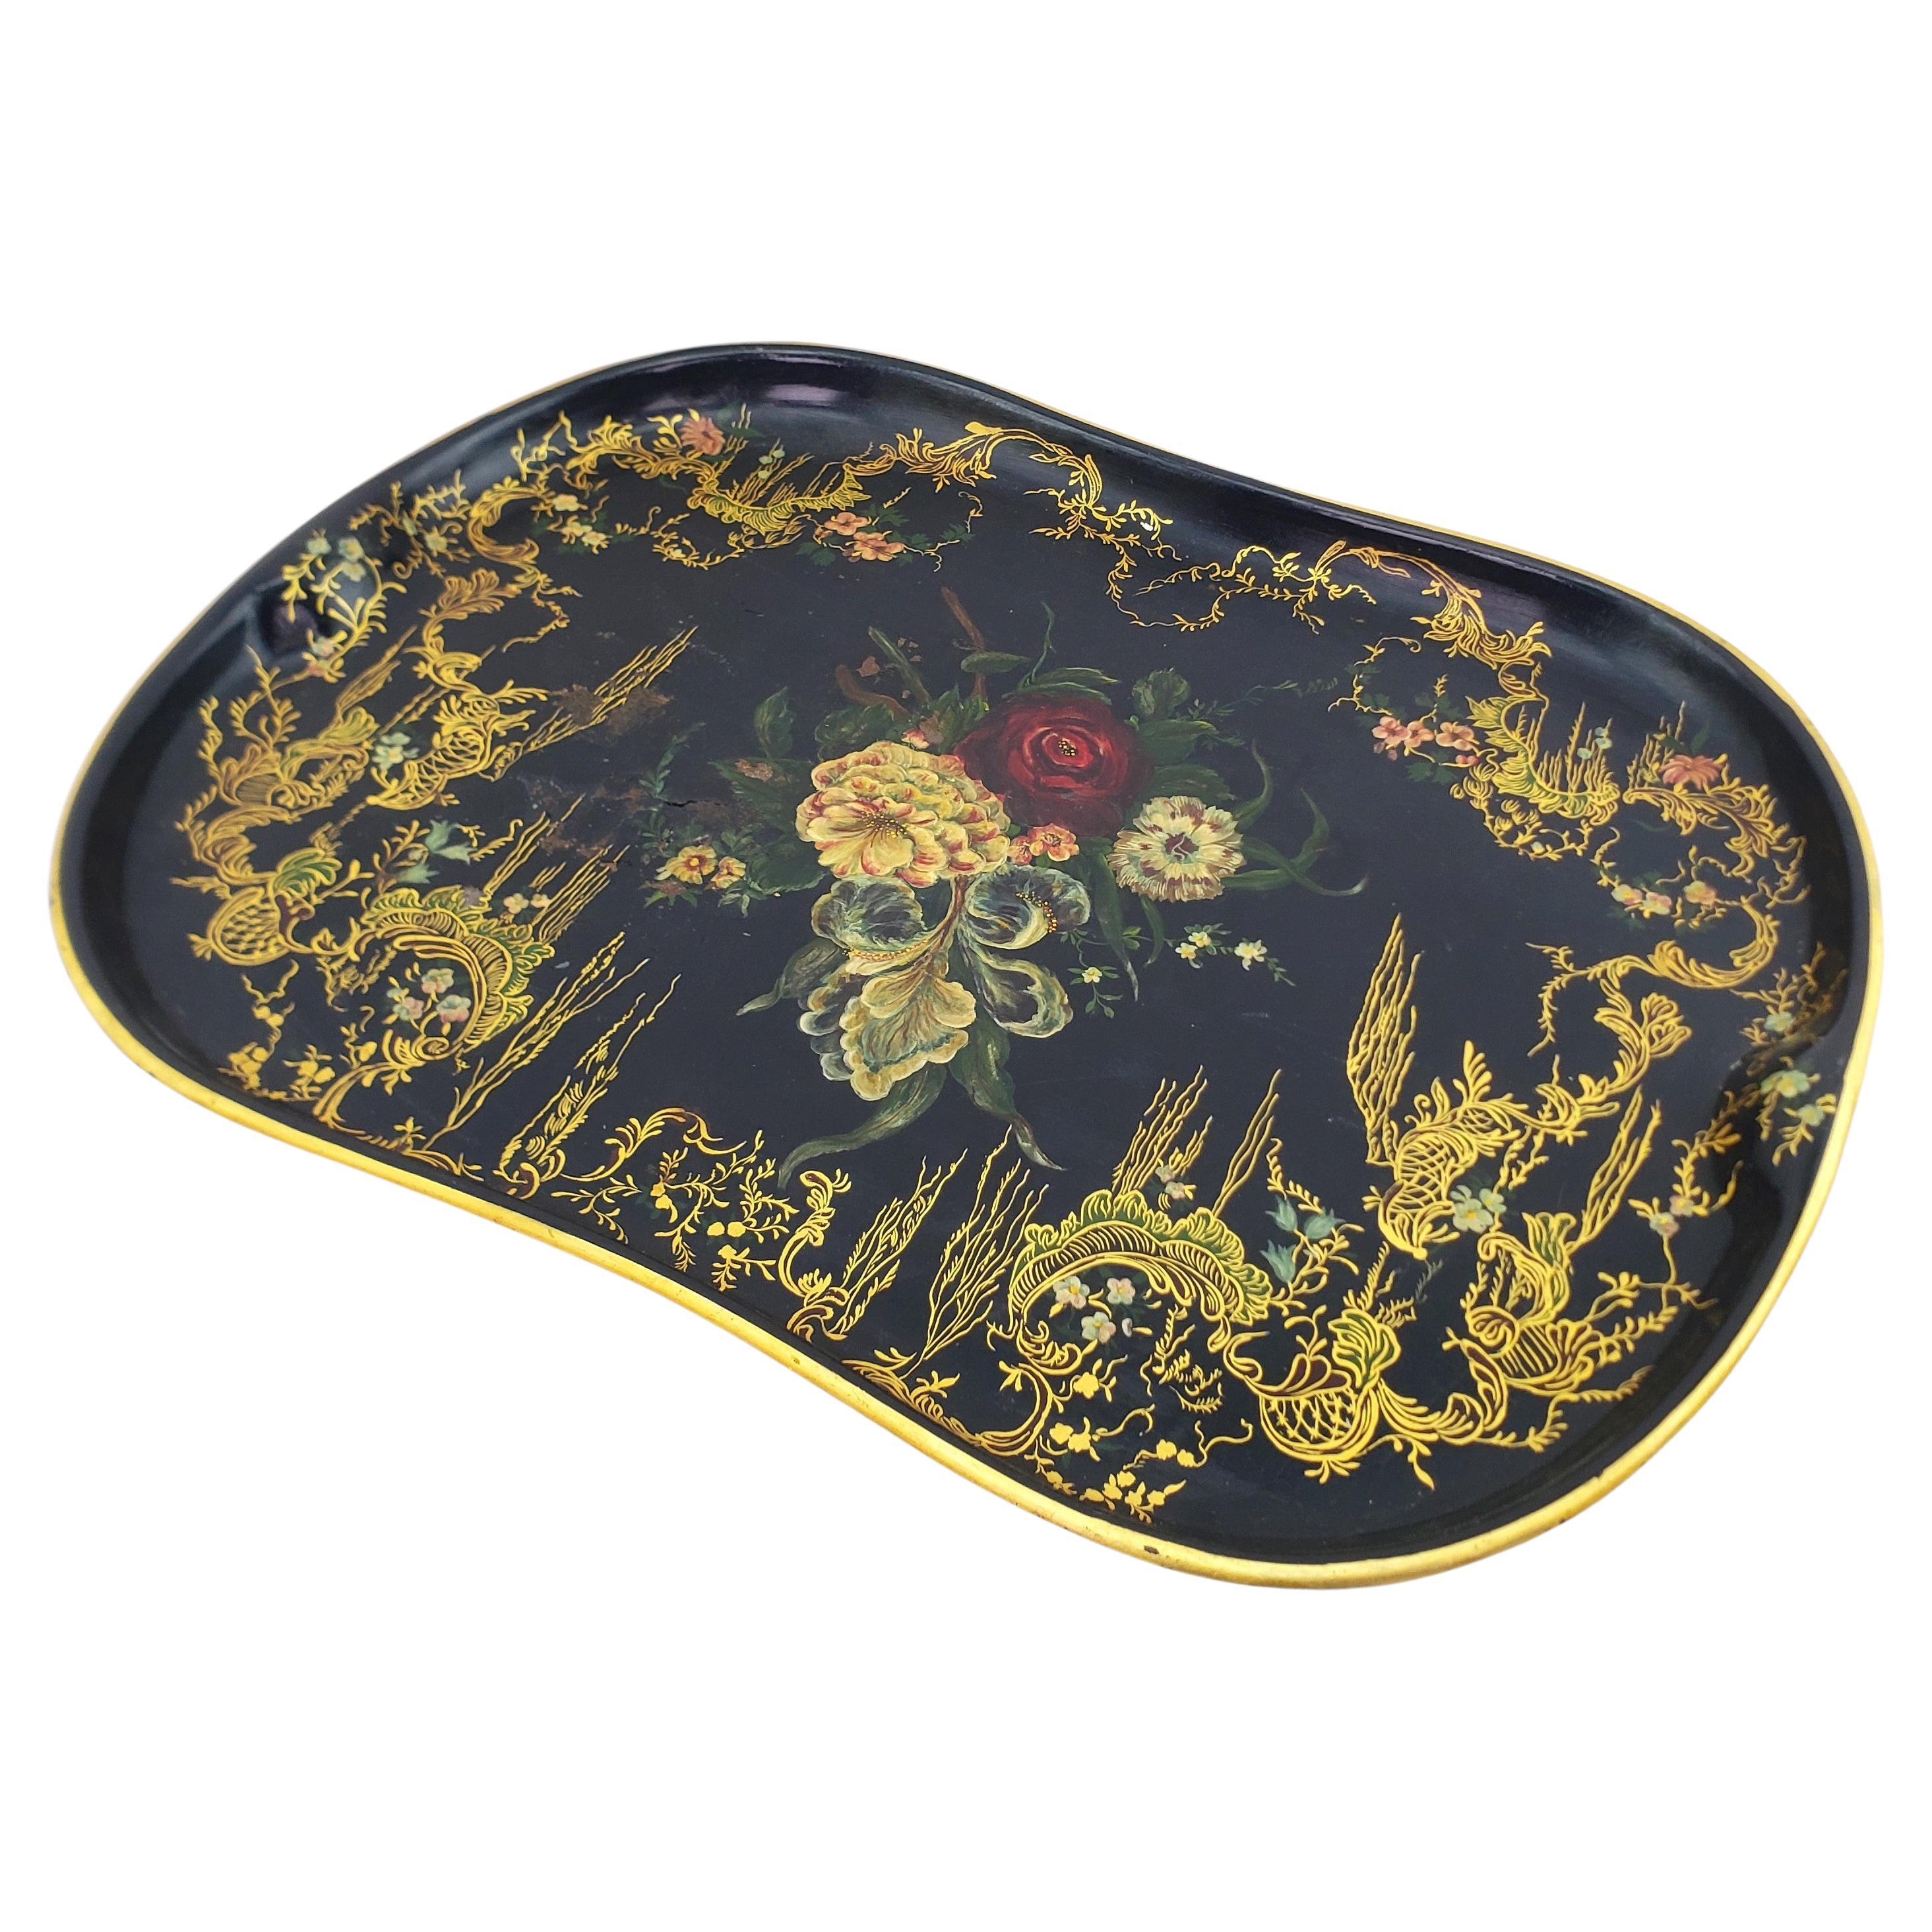 Large Antique Toleware Serving Tray with Floral Decoration & Gilt Accents For Sale